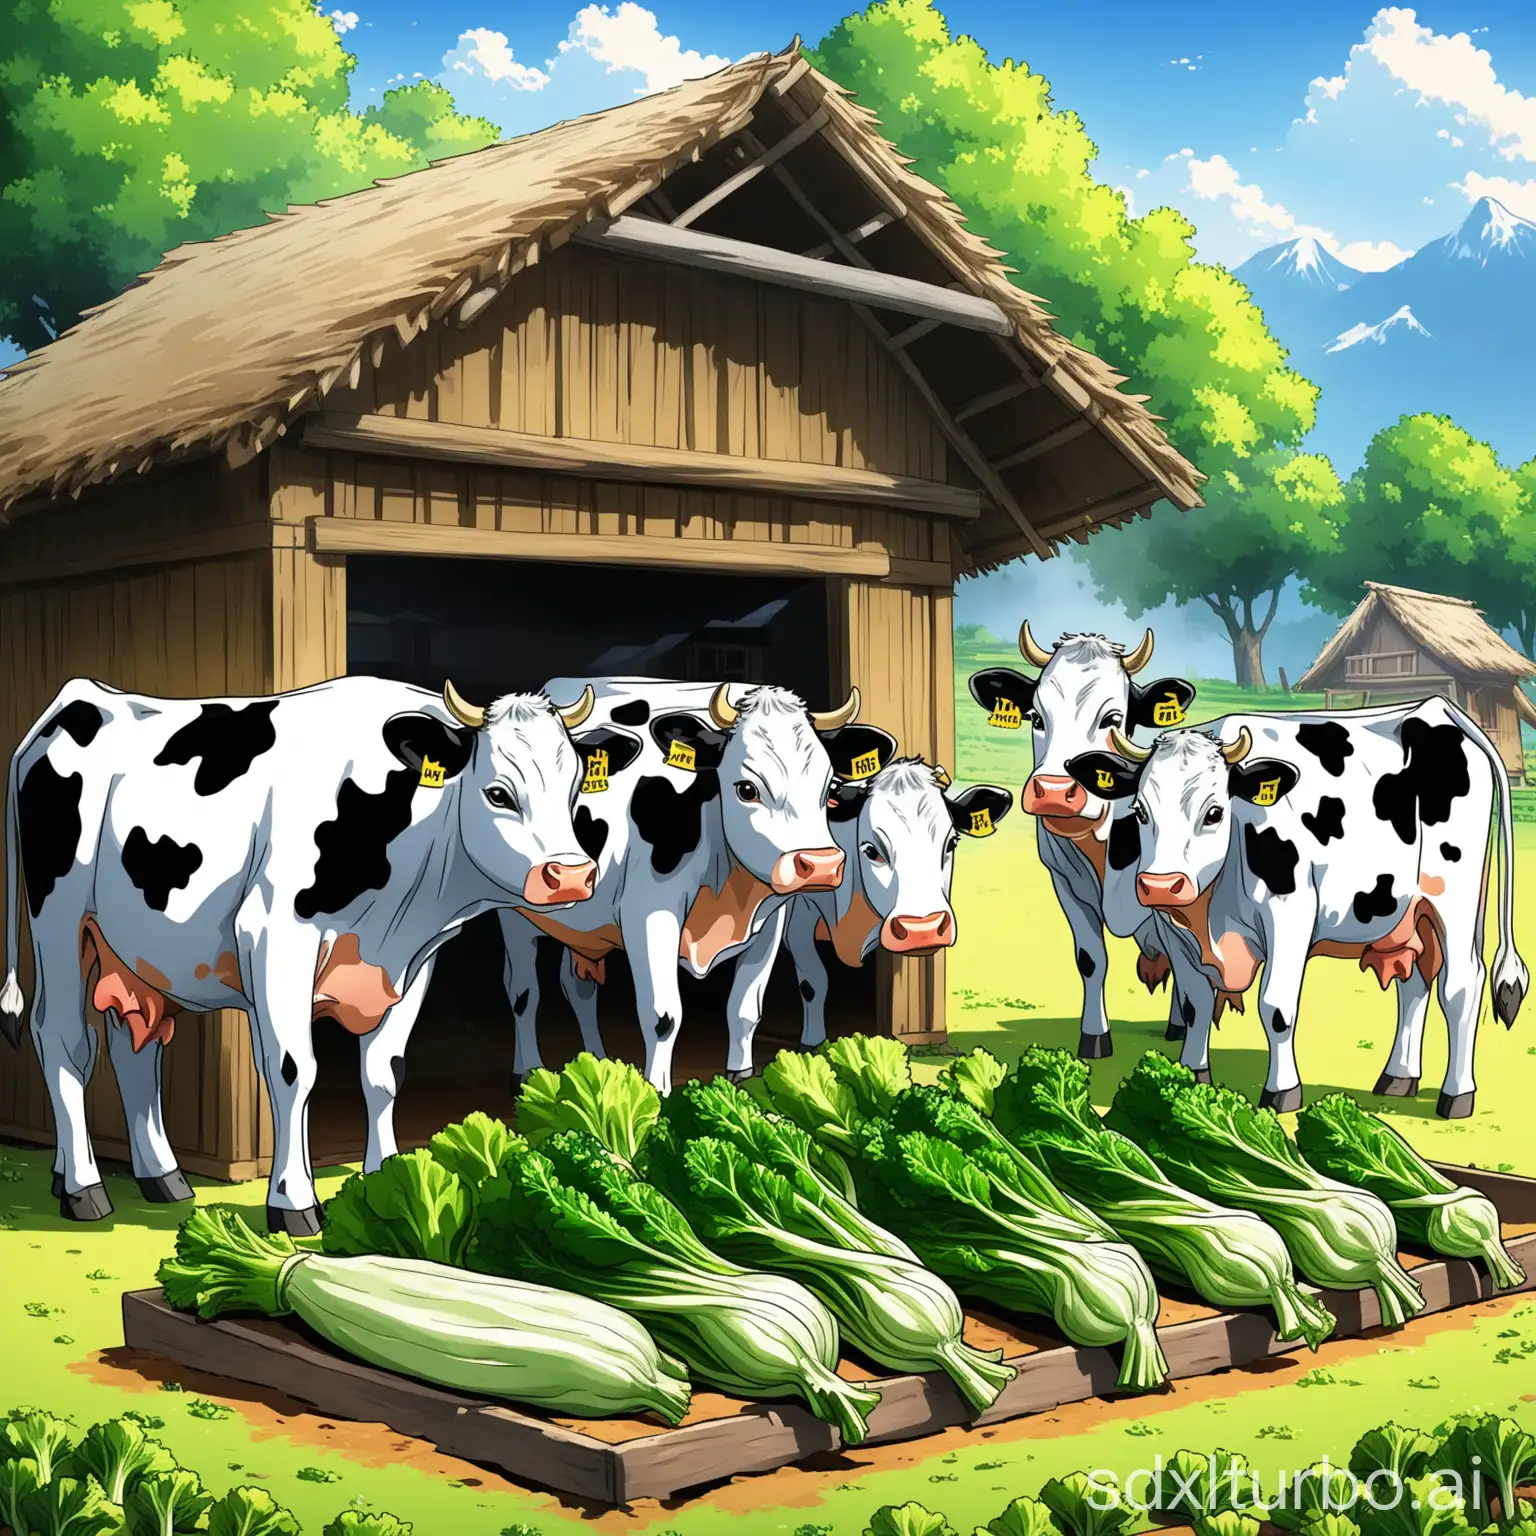 Five cows eat green vegetables in front of the hut